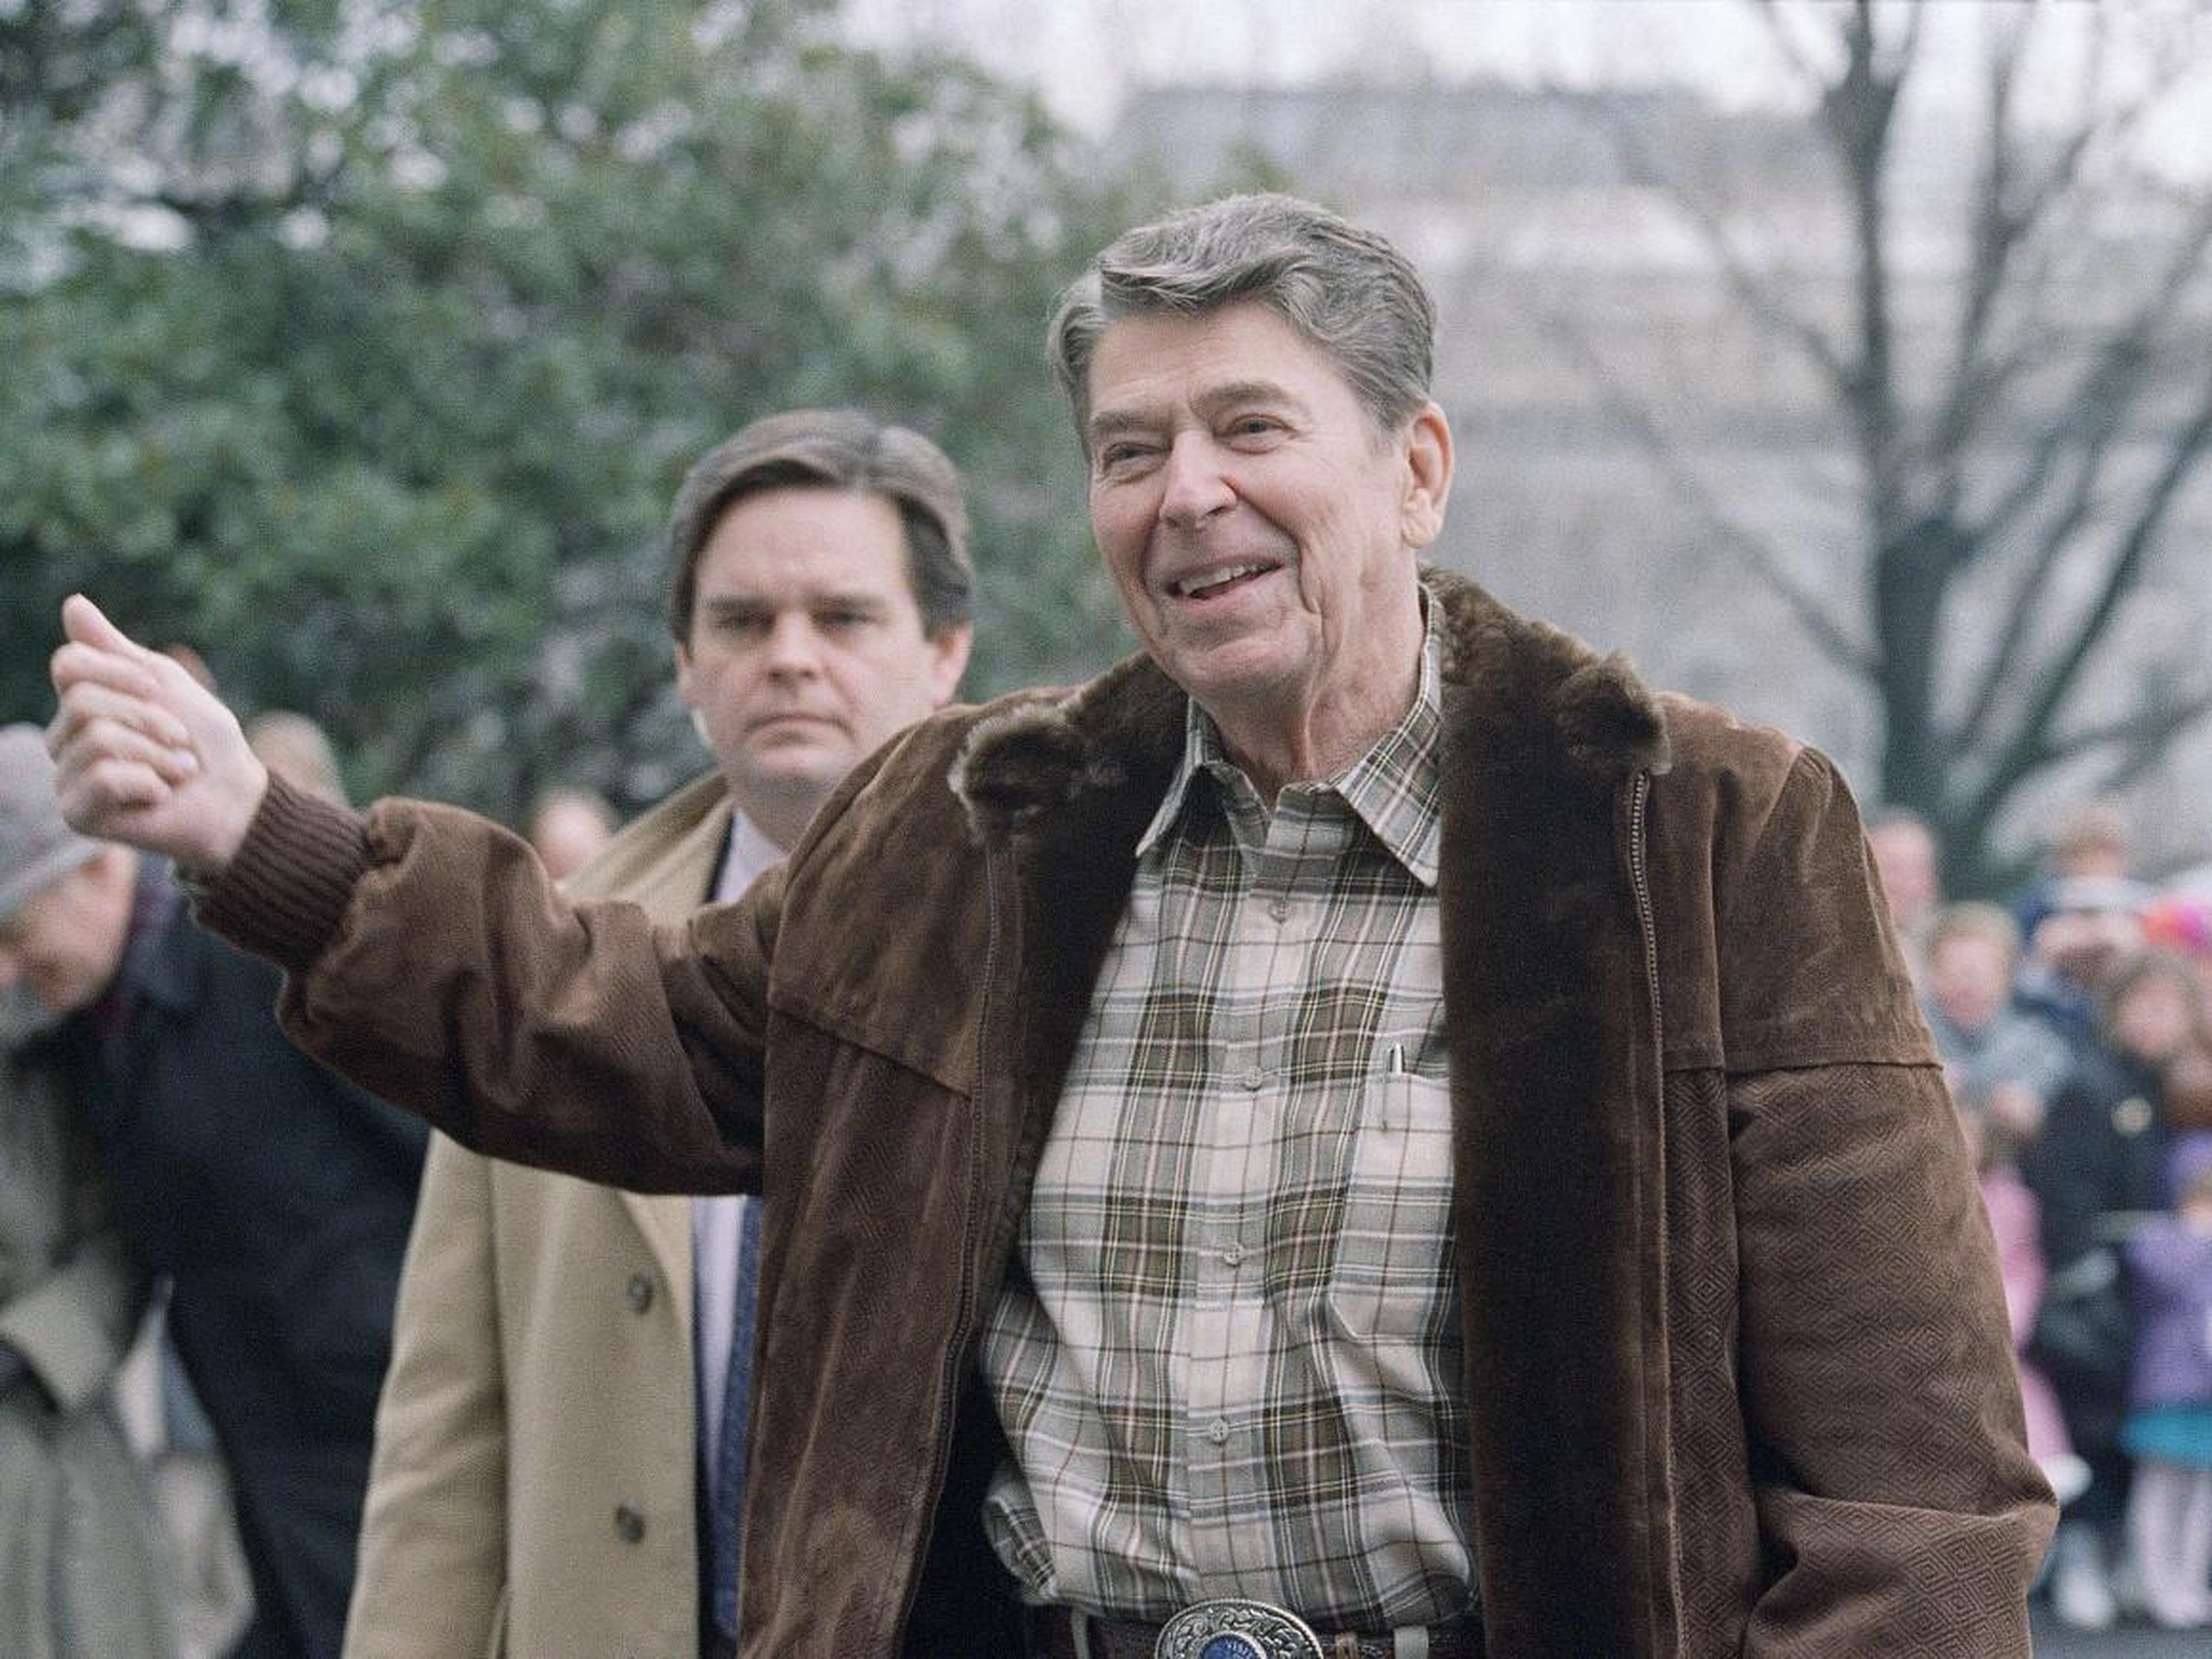 When Reagan returned to Washington after his final trip as president to Camp David in January 1989, he looked quite different.